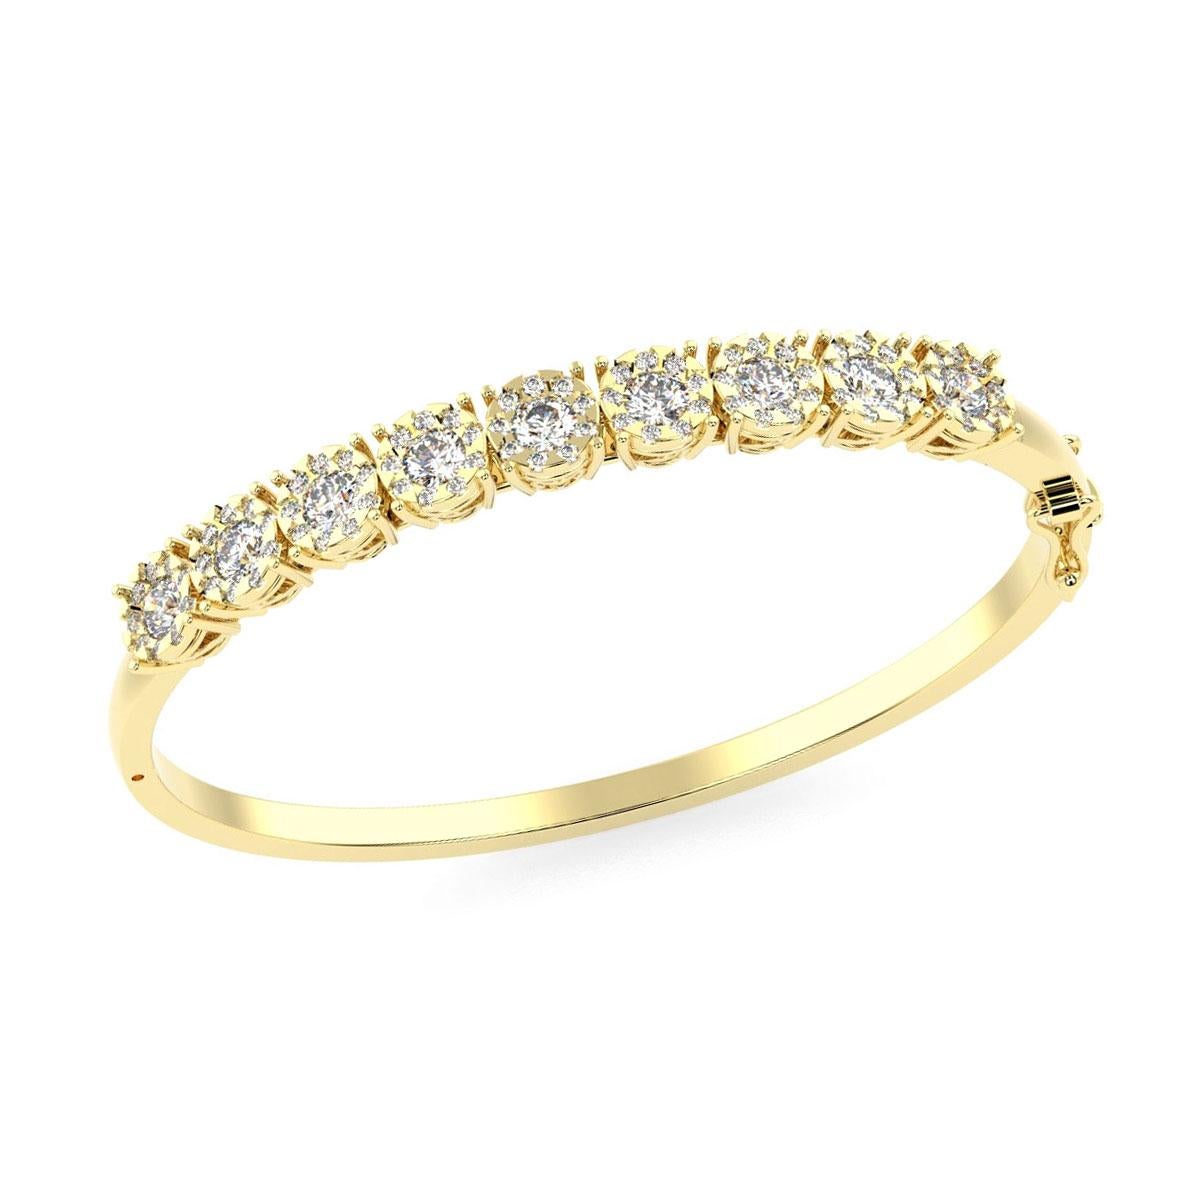 18 Karat Yellow Gold Halo Diamond Bangle '3 1/4 Carat' In New Condition For Sale In San Francisco, CA